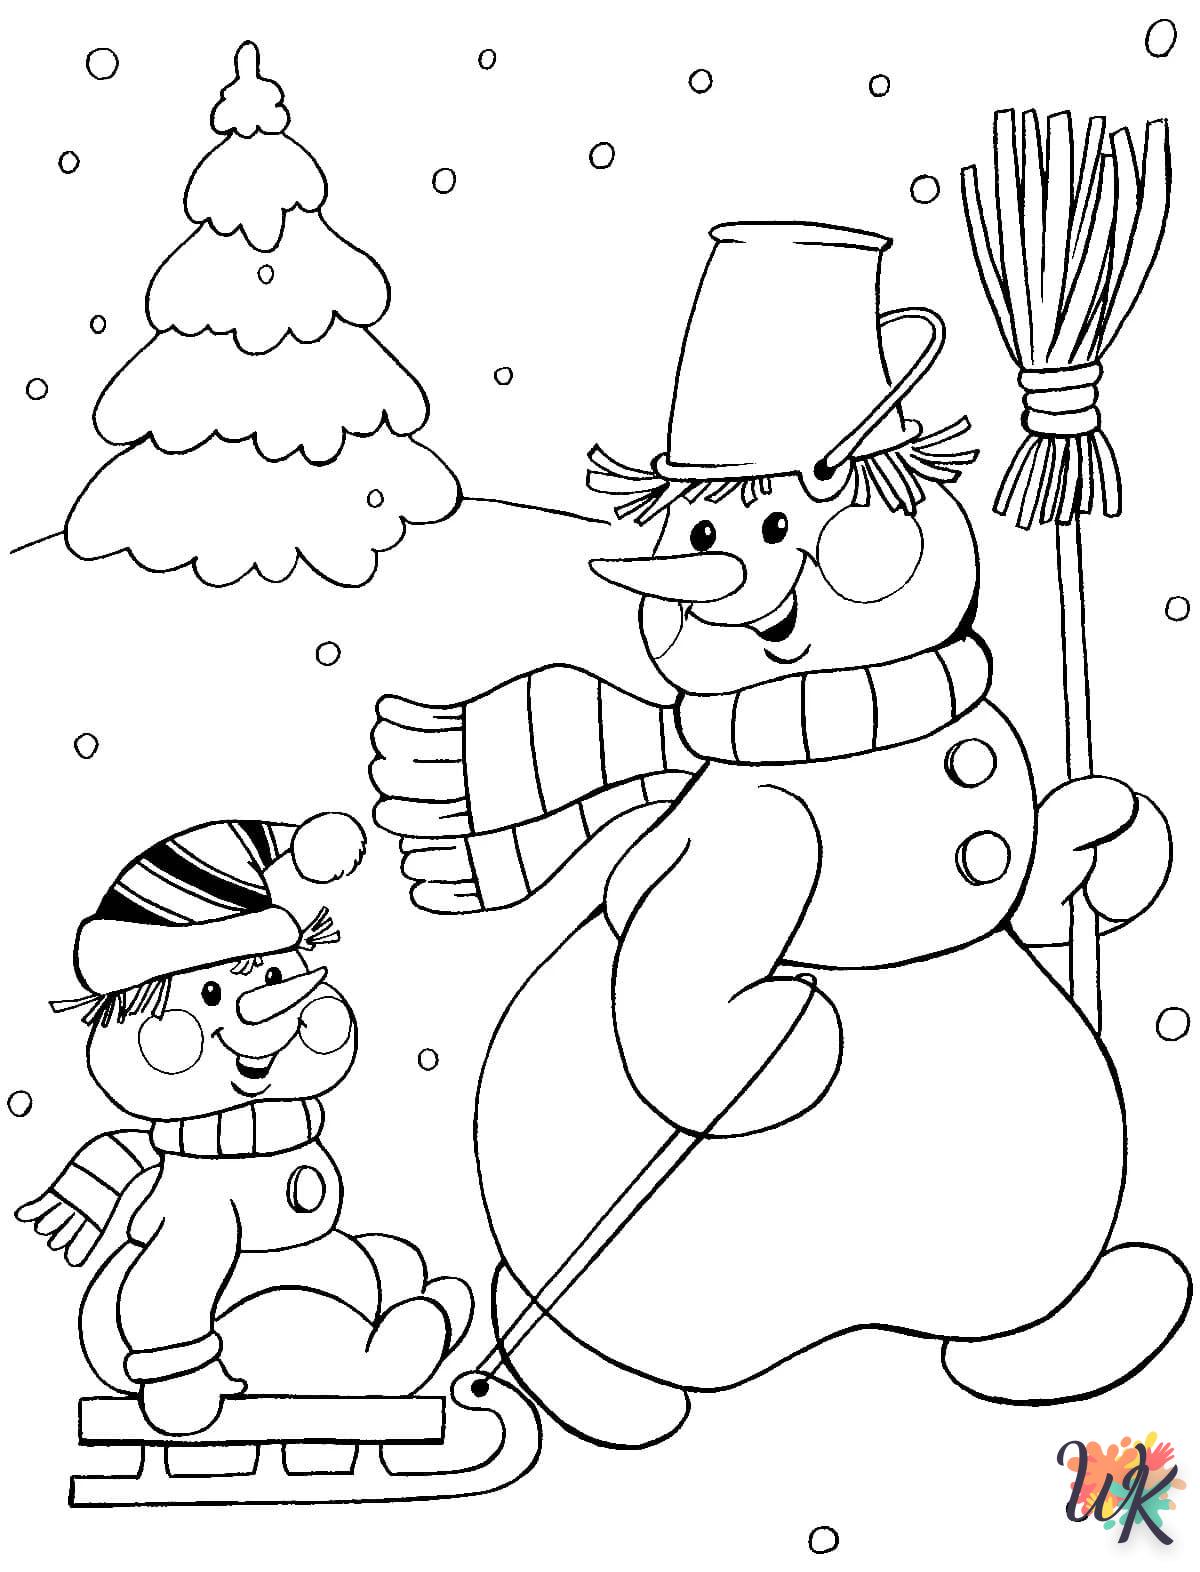 Free Snowman coloring for children